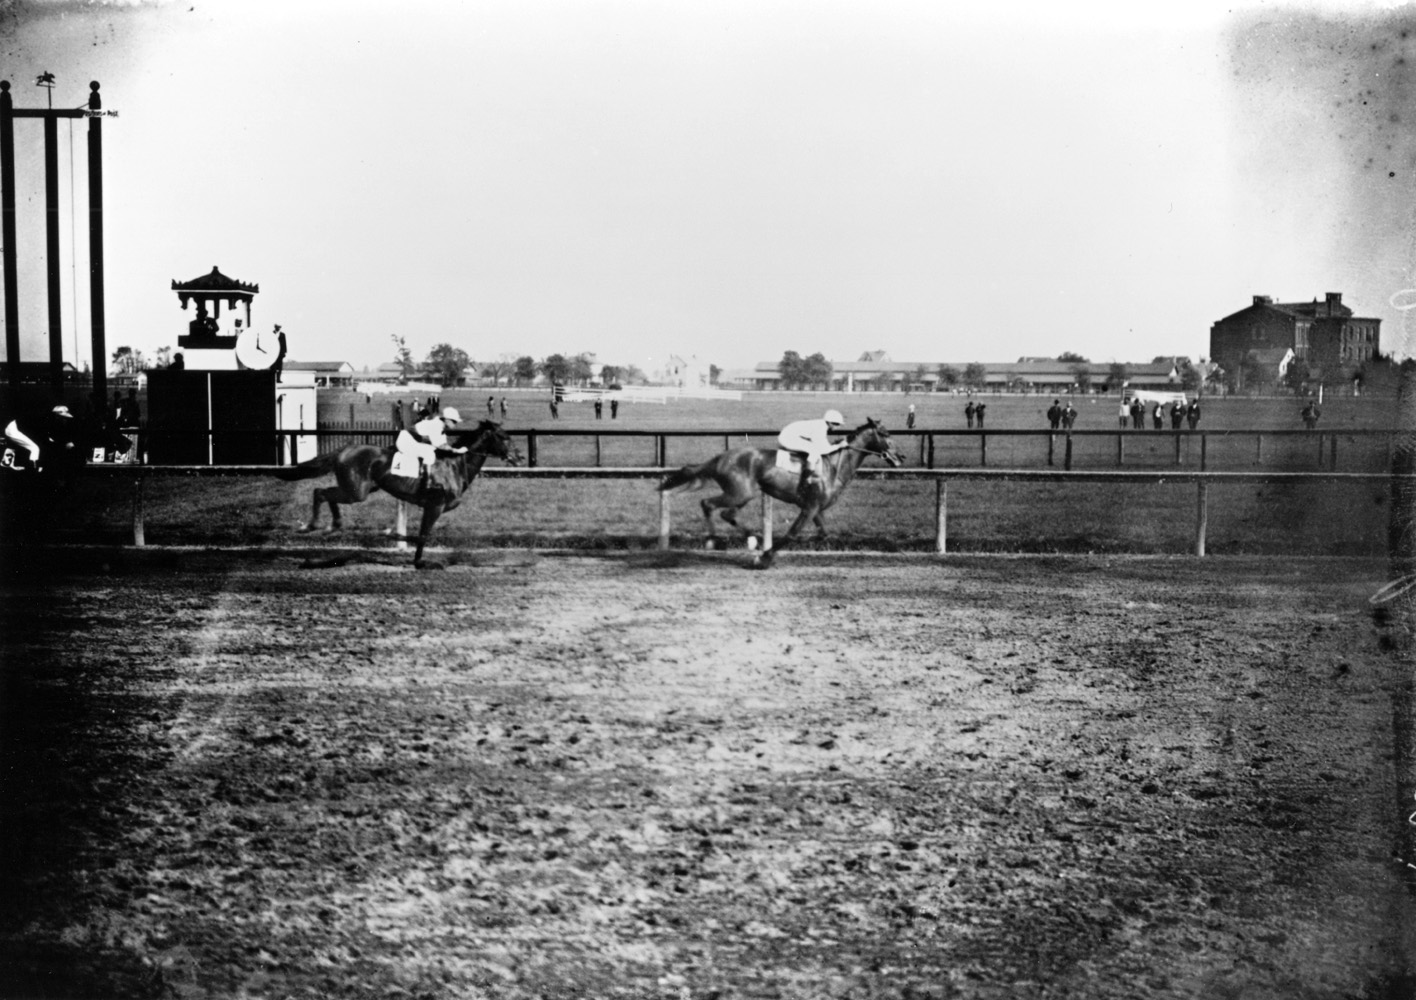 Sysonby (Nicol up) winning the 1905 Champion Stakes at Sheepshead Bay, his final career race (Keeneland Library Cook Collection/Museum Collection)